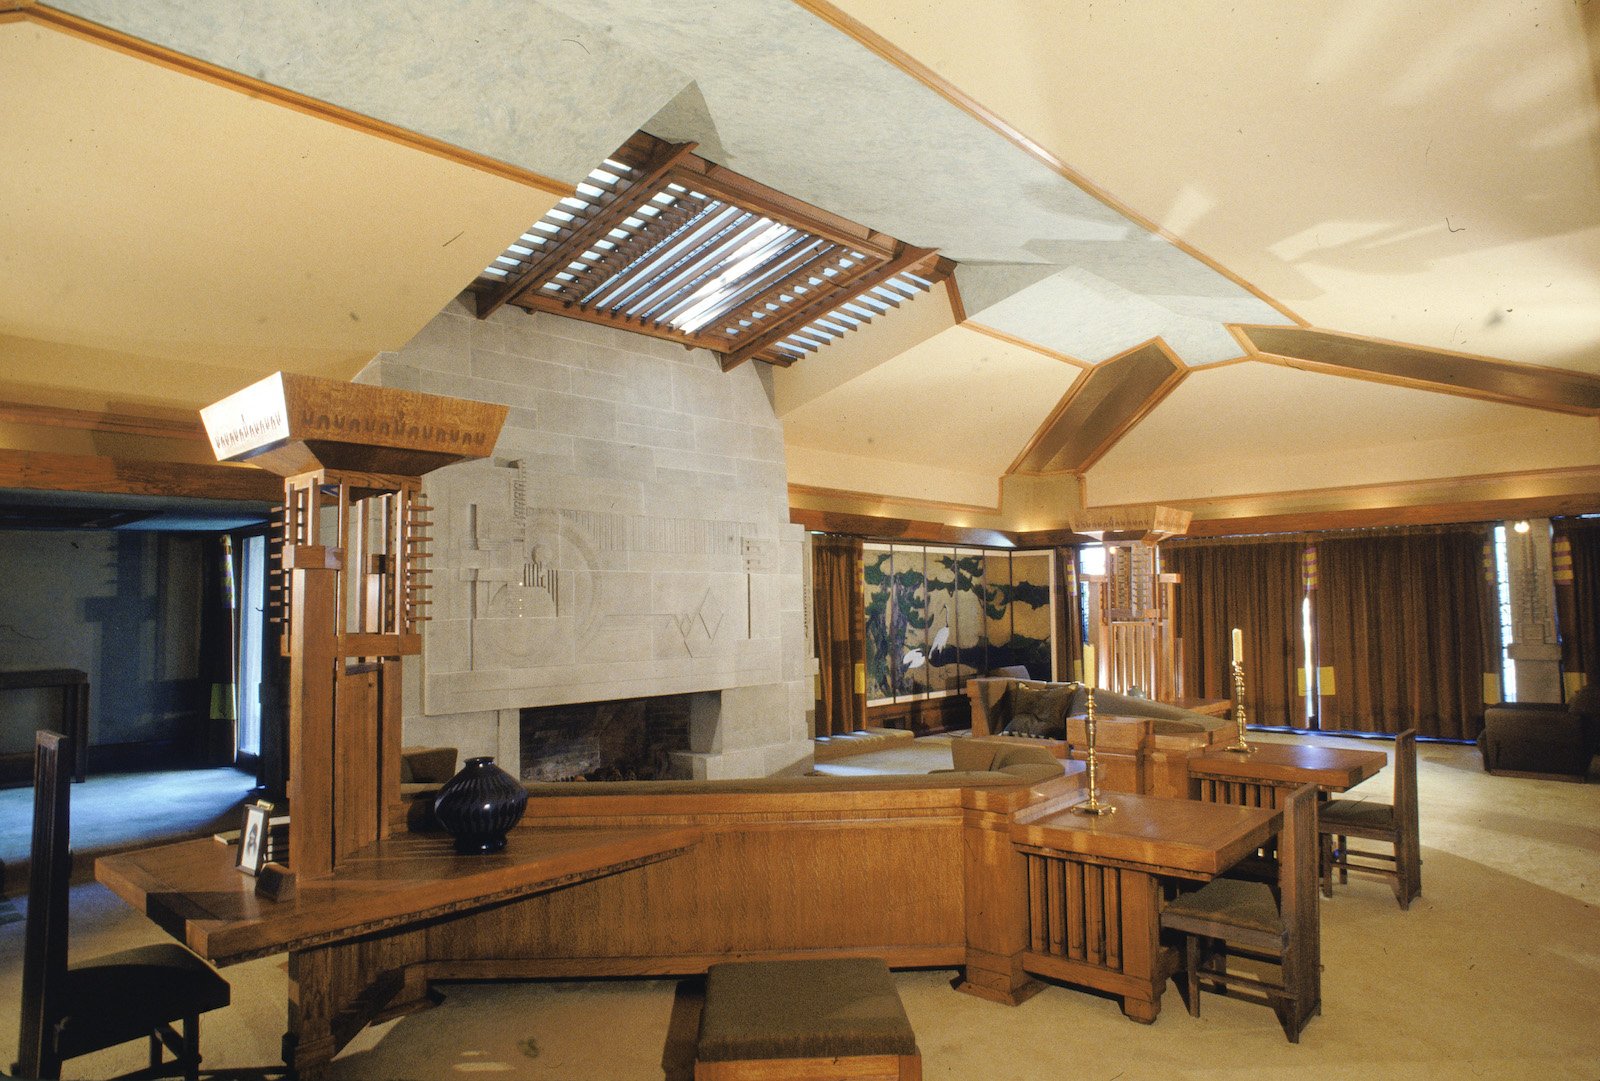 The Hollyhock House living room, designed by American architect Frank Lloyd Wright